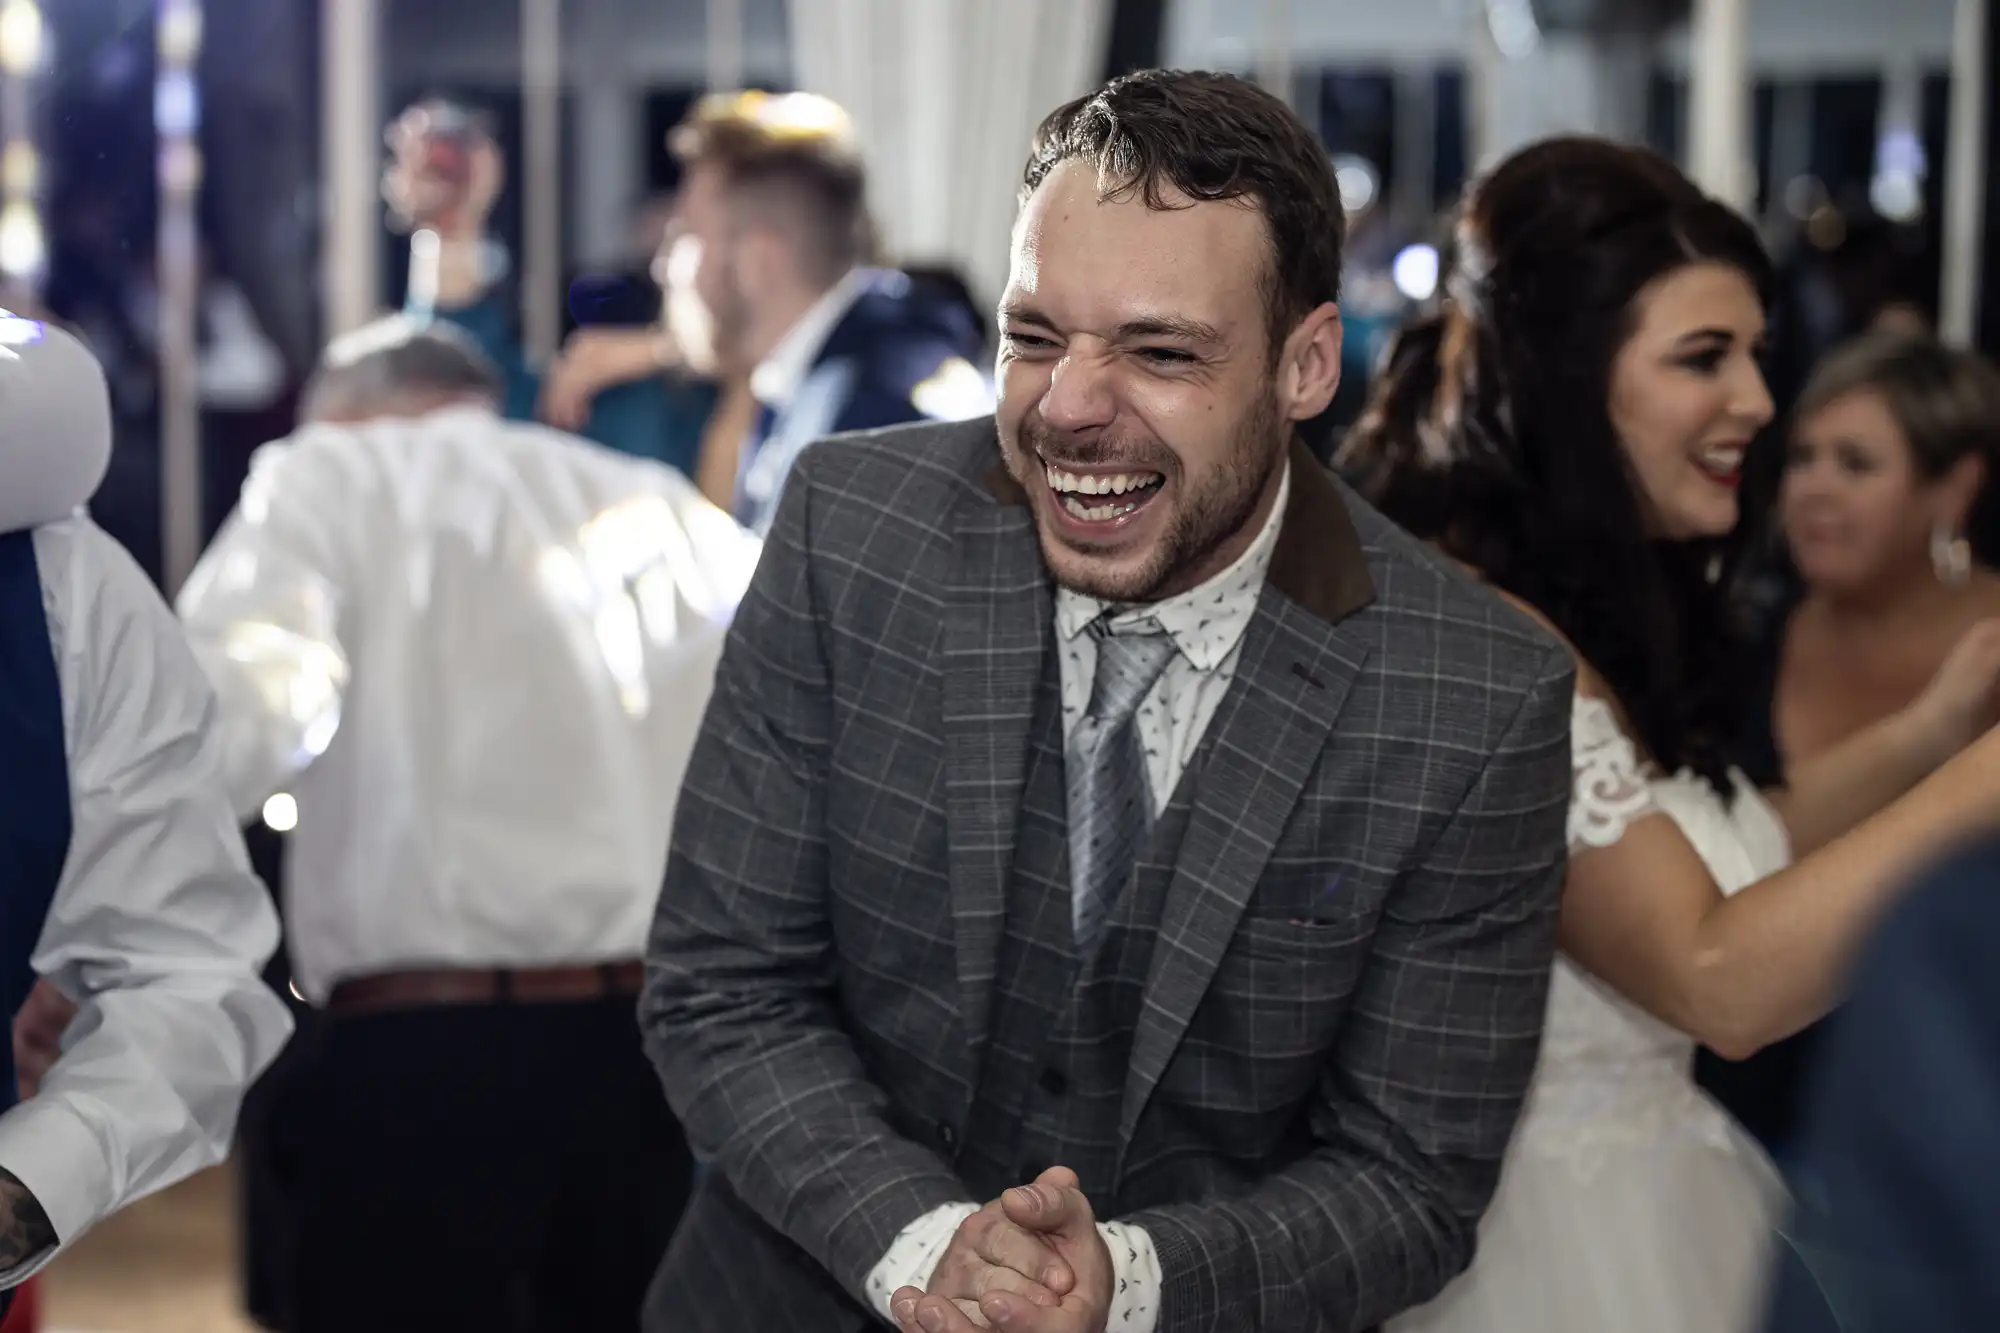 A man, dressed in a plaid suit, is laughing and clapping in a lively indoor setting, surrounded by other people, including a bride in a white gown nearby.